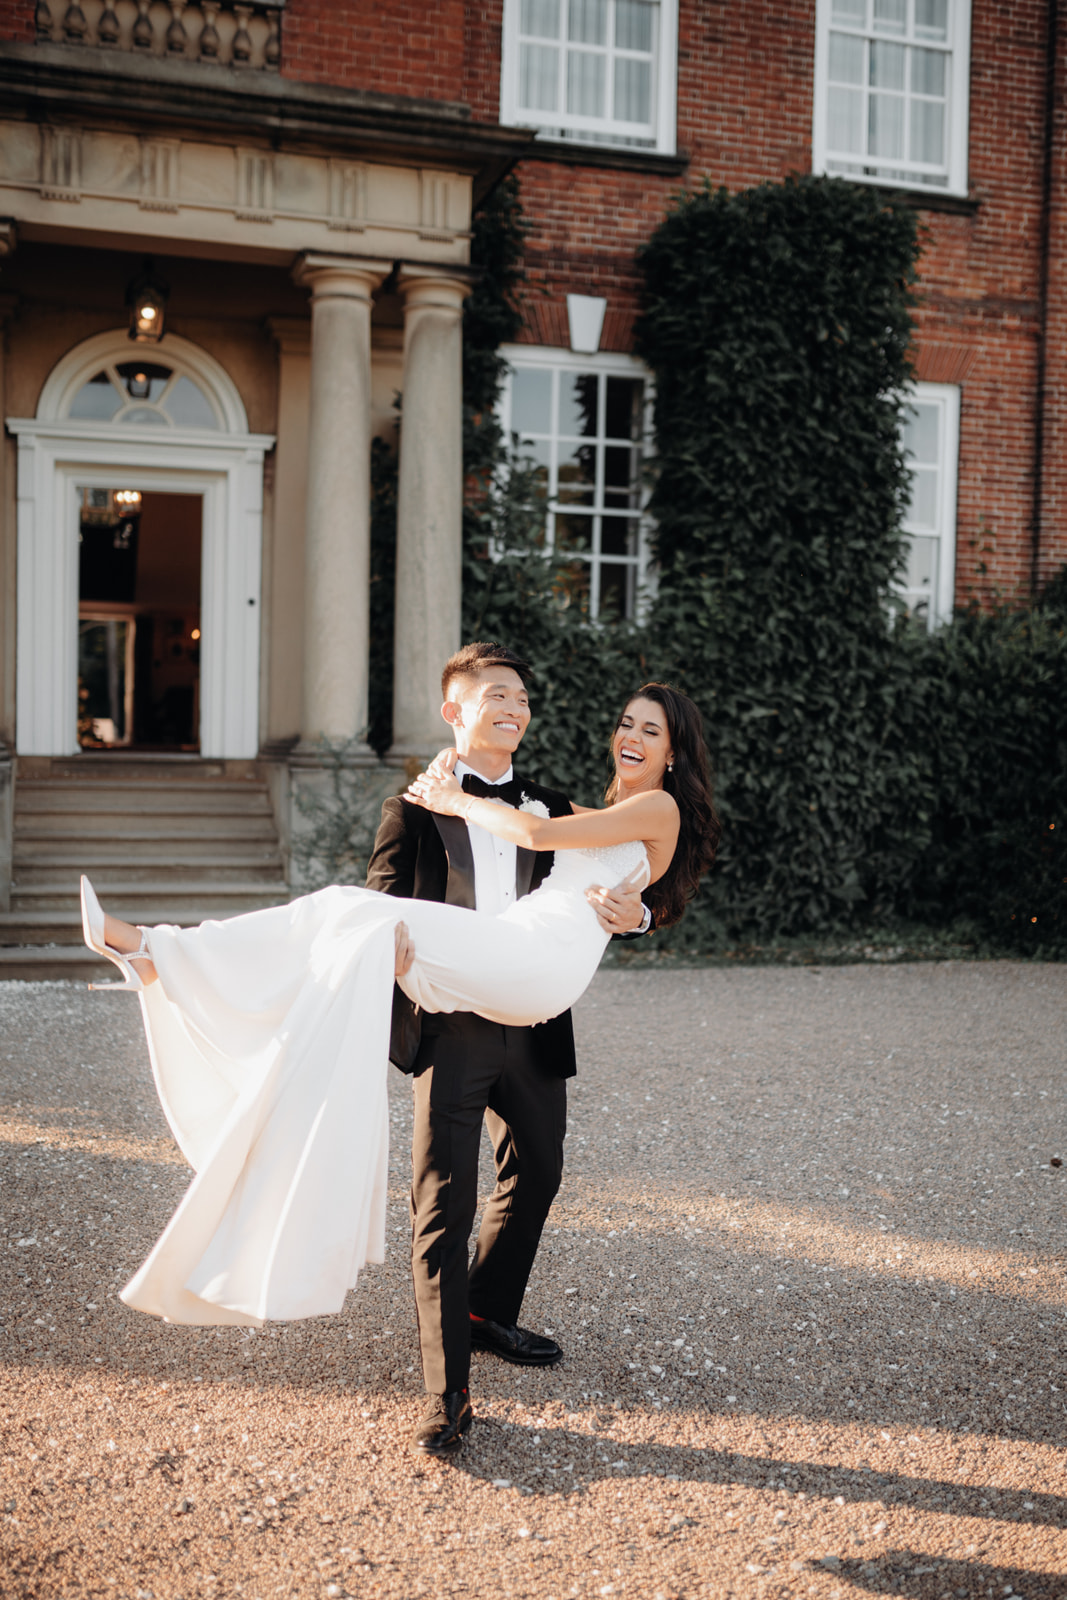 A fusion Greek and Chinese September wedding at Iscoyd Park by Harvey Films